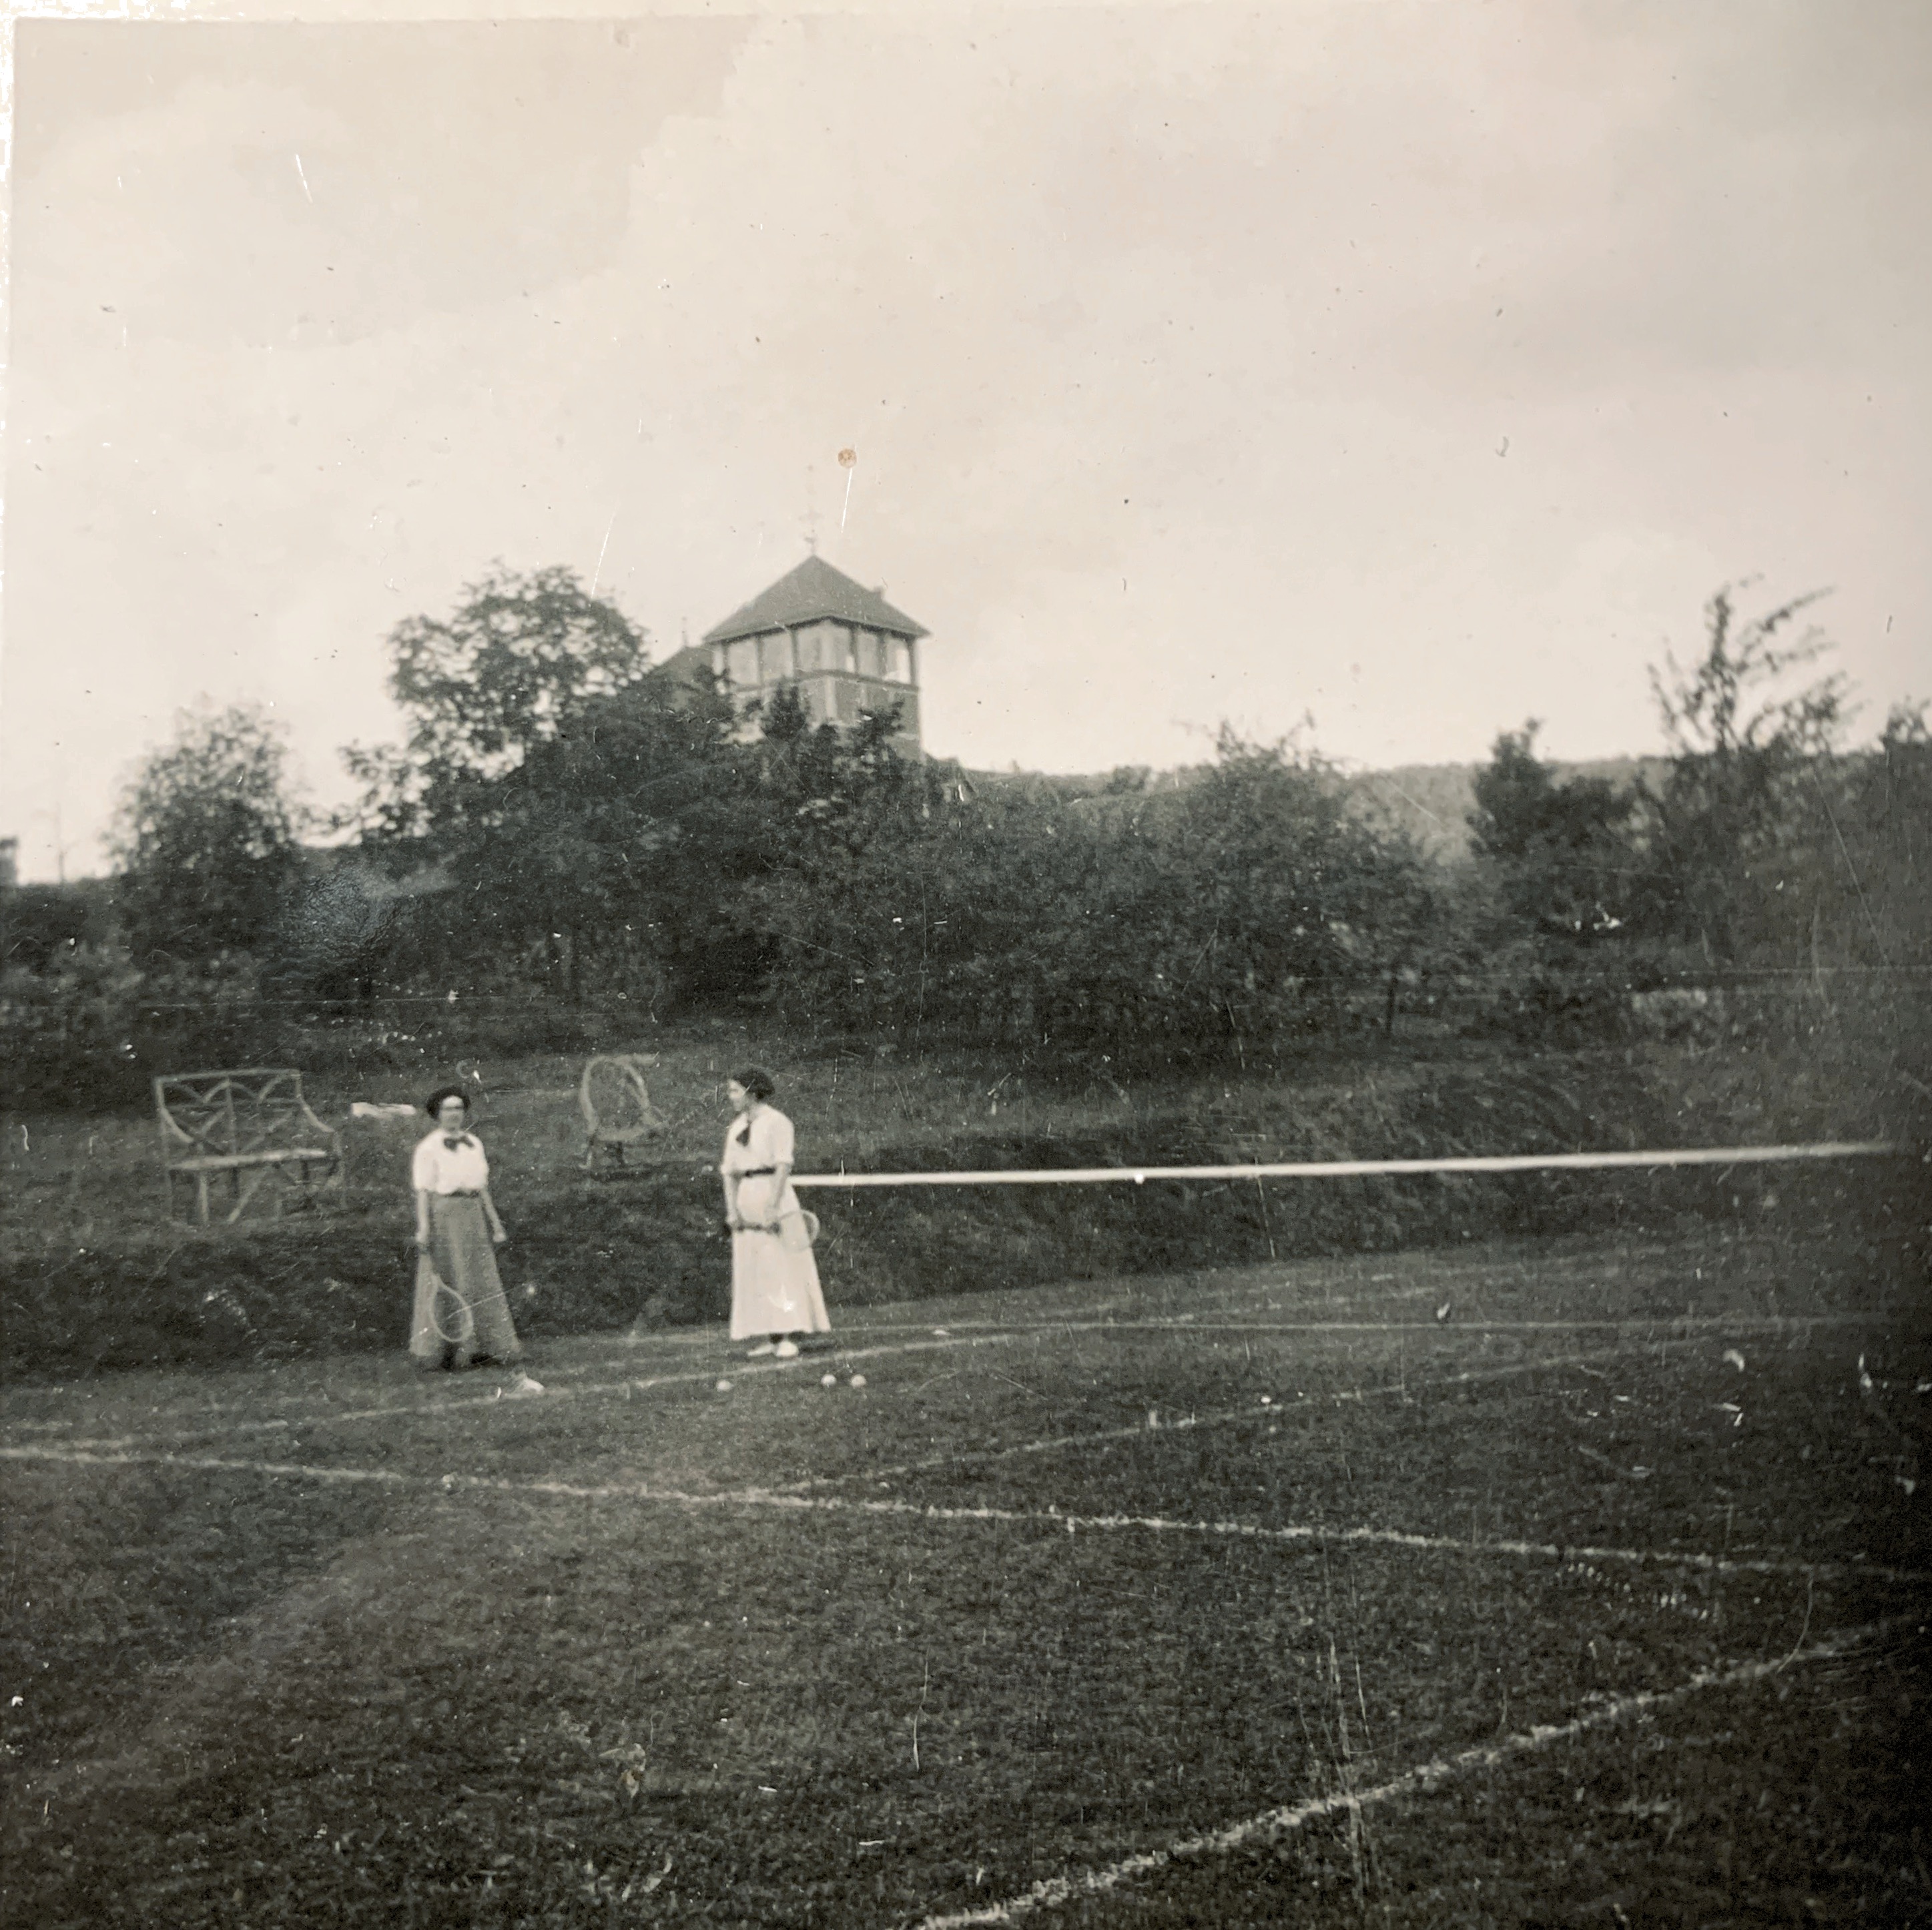 Photo: Butterworth tennis court, pre 1924. Ethel & Grace Butterworth were sisters. 

In 1919, Mr. Butterworth purchased two additional acres which abutted his property to the East from Francis Nelson, an Ottawa civil servant. The purpose of this purchase was to preserve the view down to the Ottawa River Valley. Included in this purchase was an additional 20 foot 